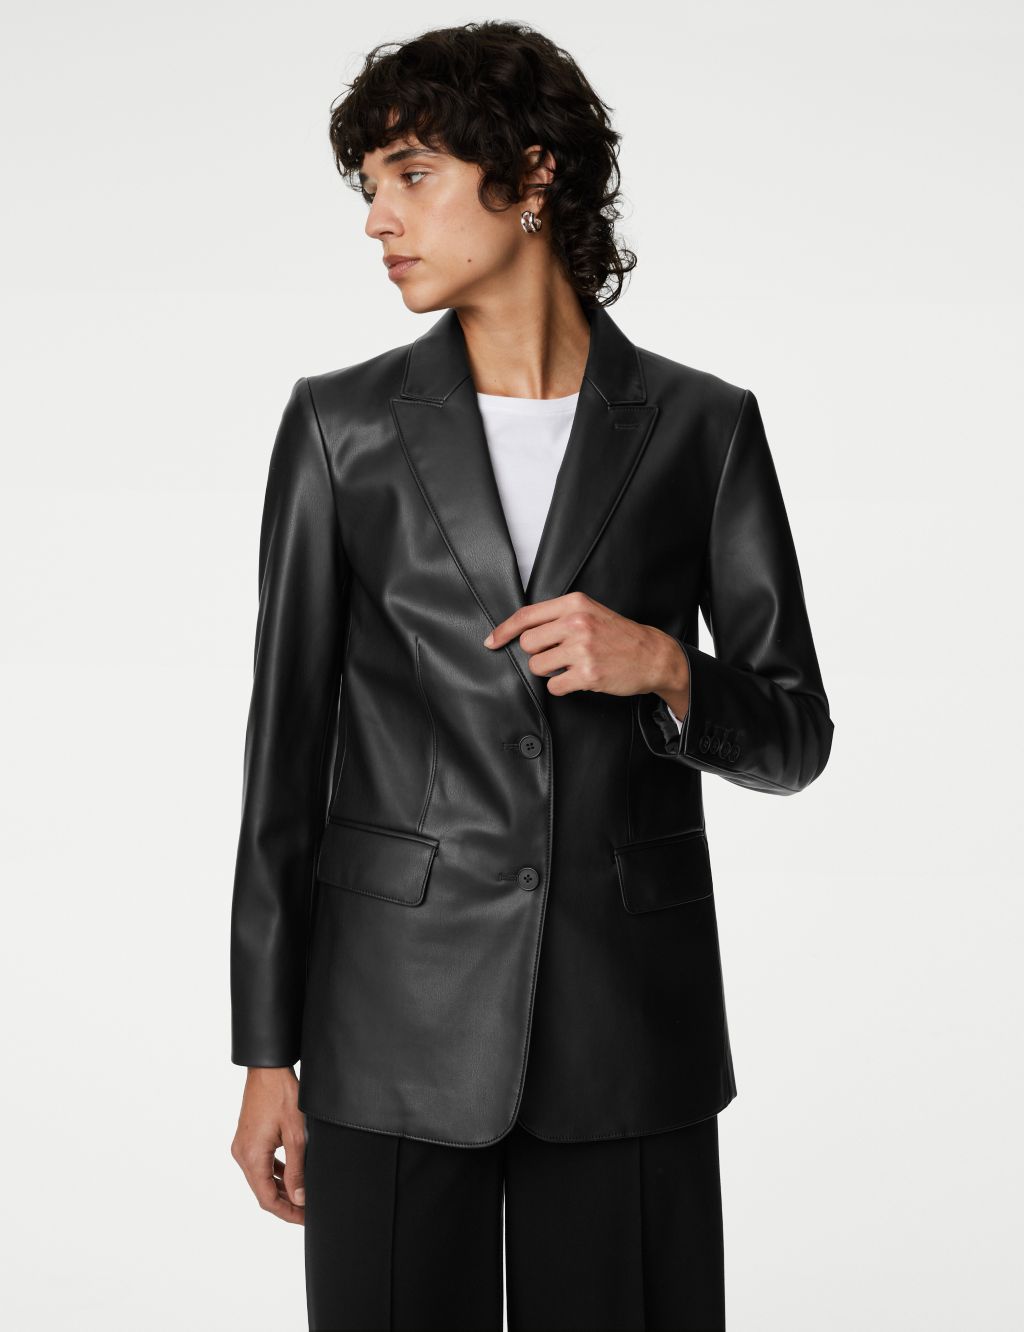 Faux Leather Tailored Single Breasted Blazer image 5